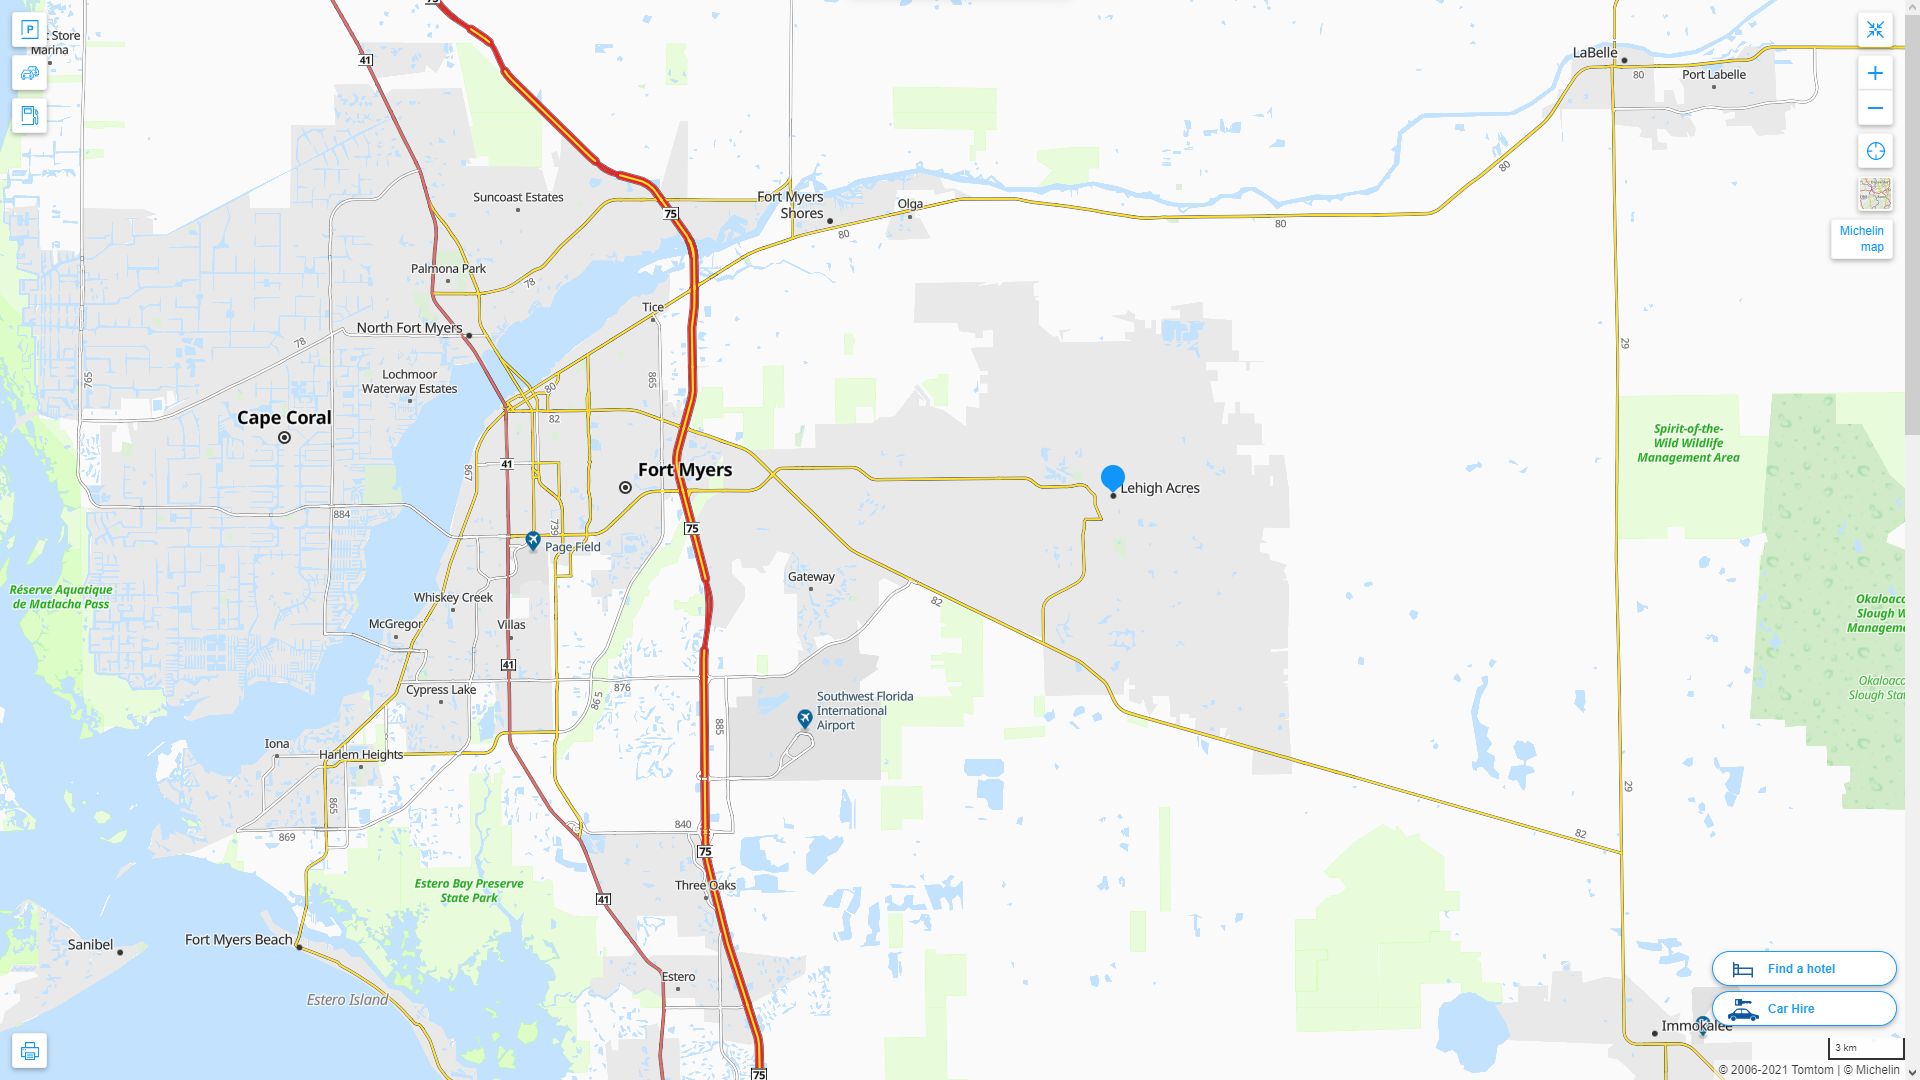 Lehigh Acres Florida Highway and Road Map